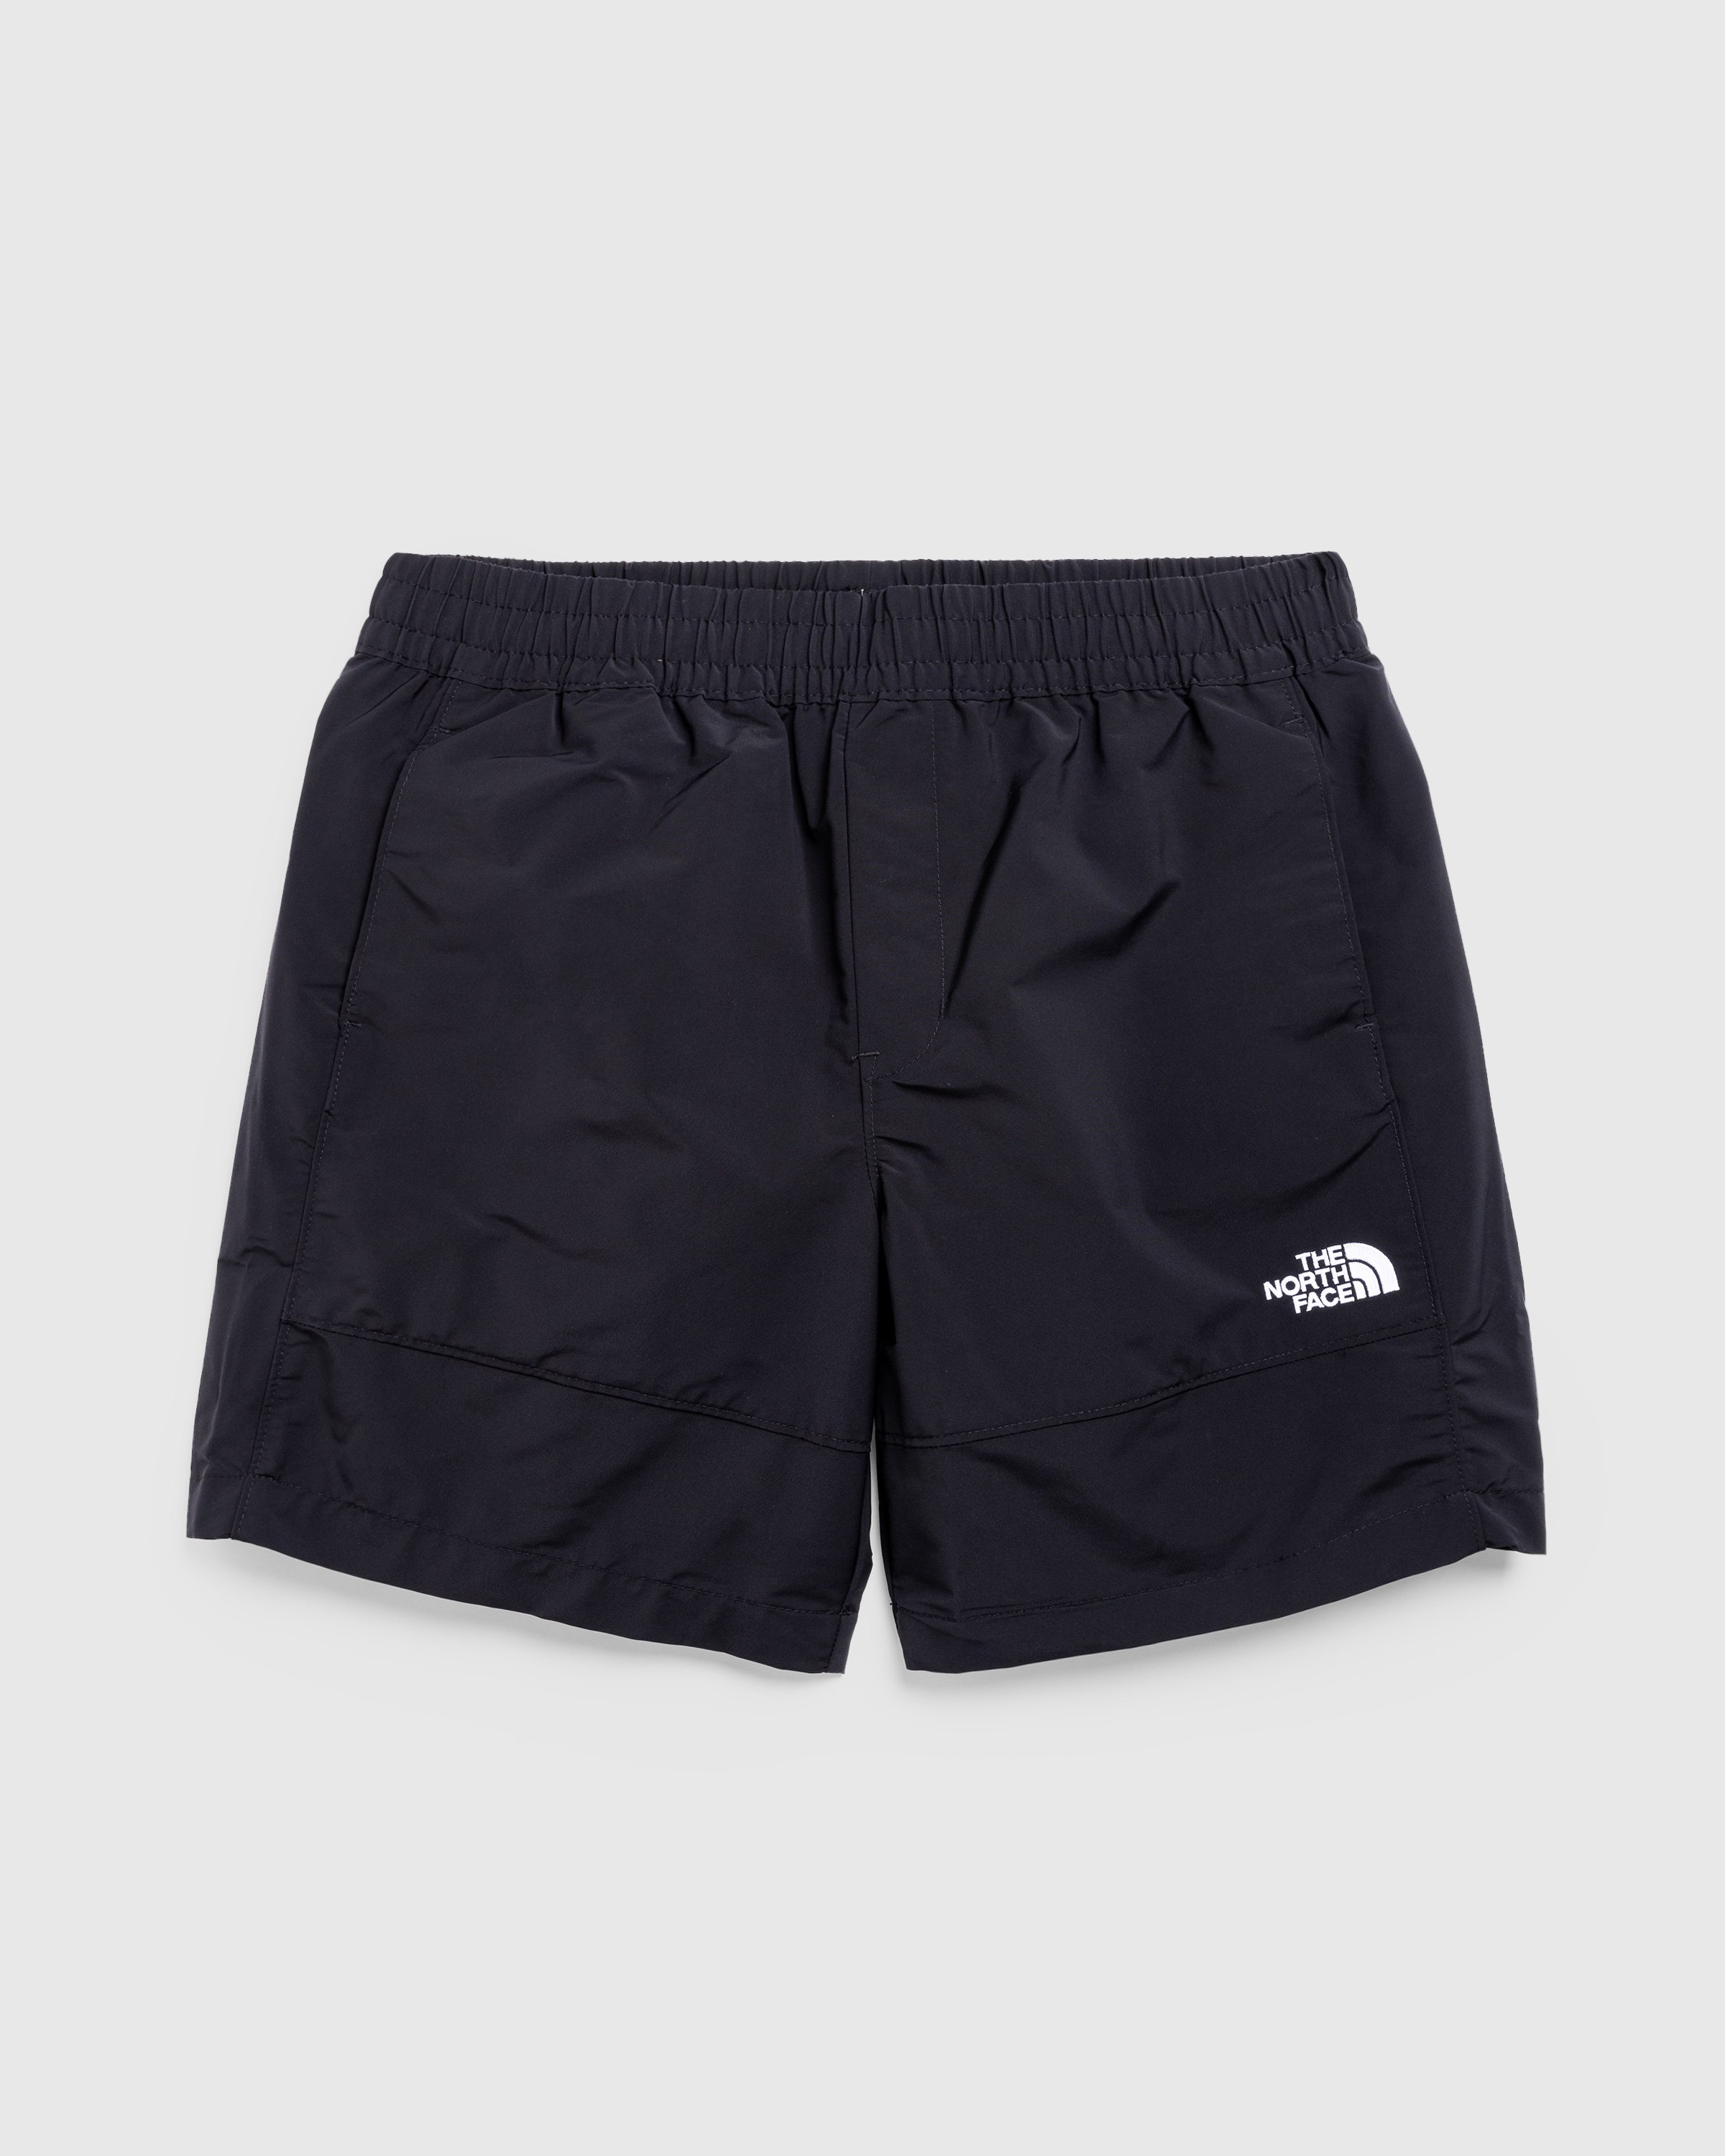 The North Face - M TNF EASY WIND SHORT TNF BLACK - Clothing - Black - Image 1